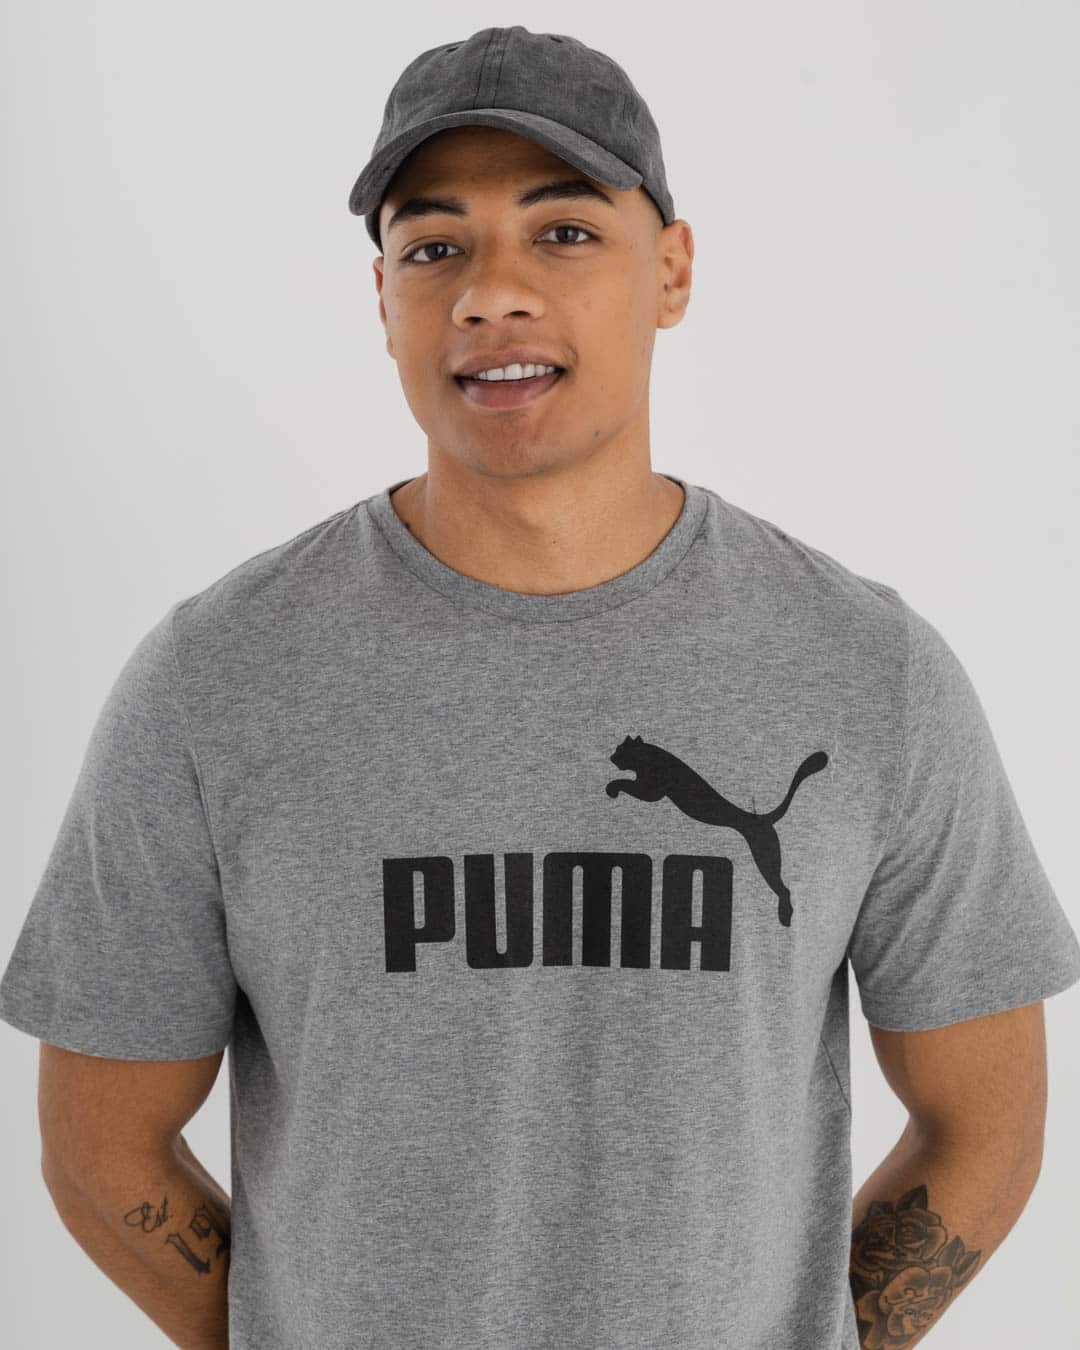 portrait shot of man wearing grey Puma t-shirt with logo on chest